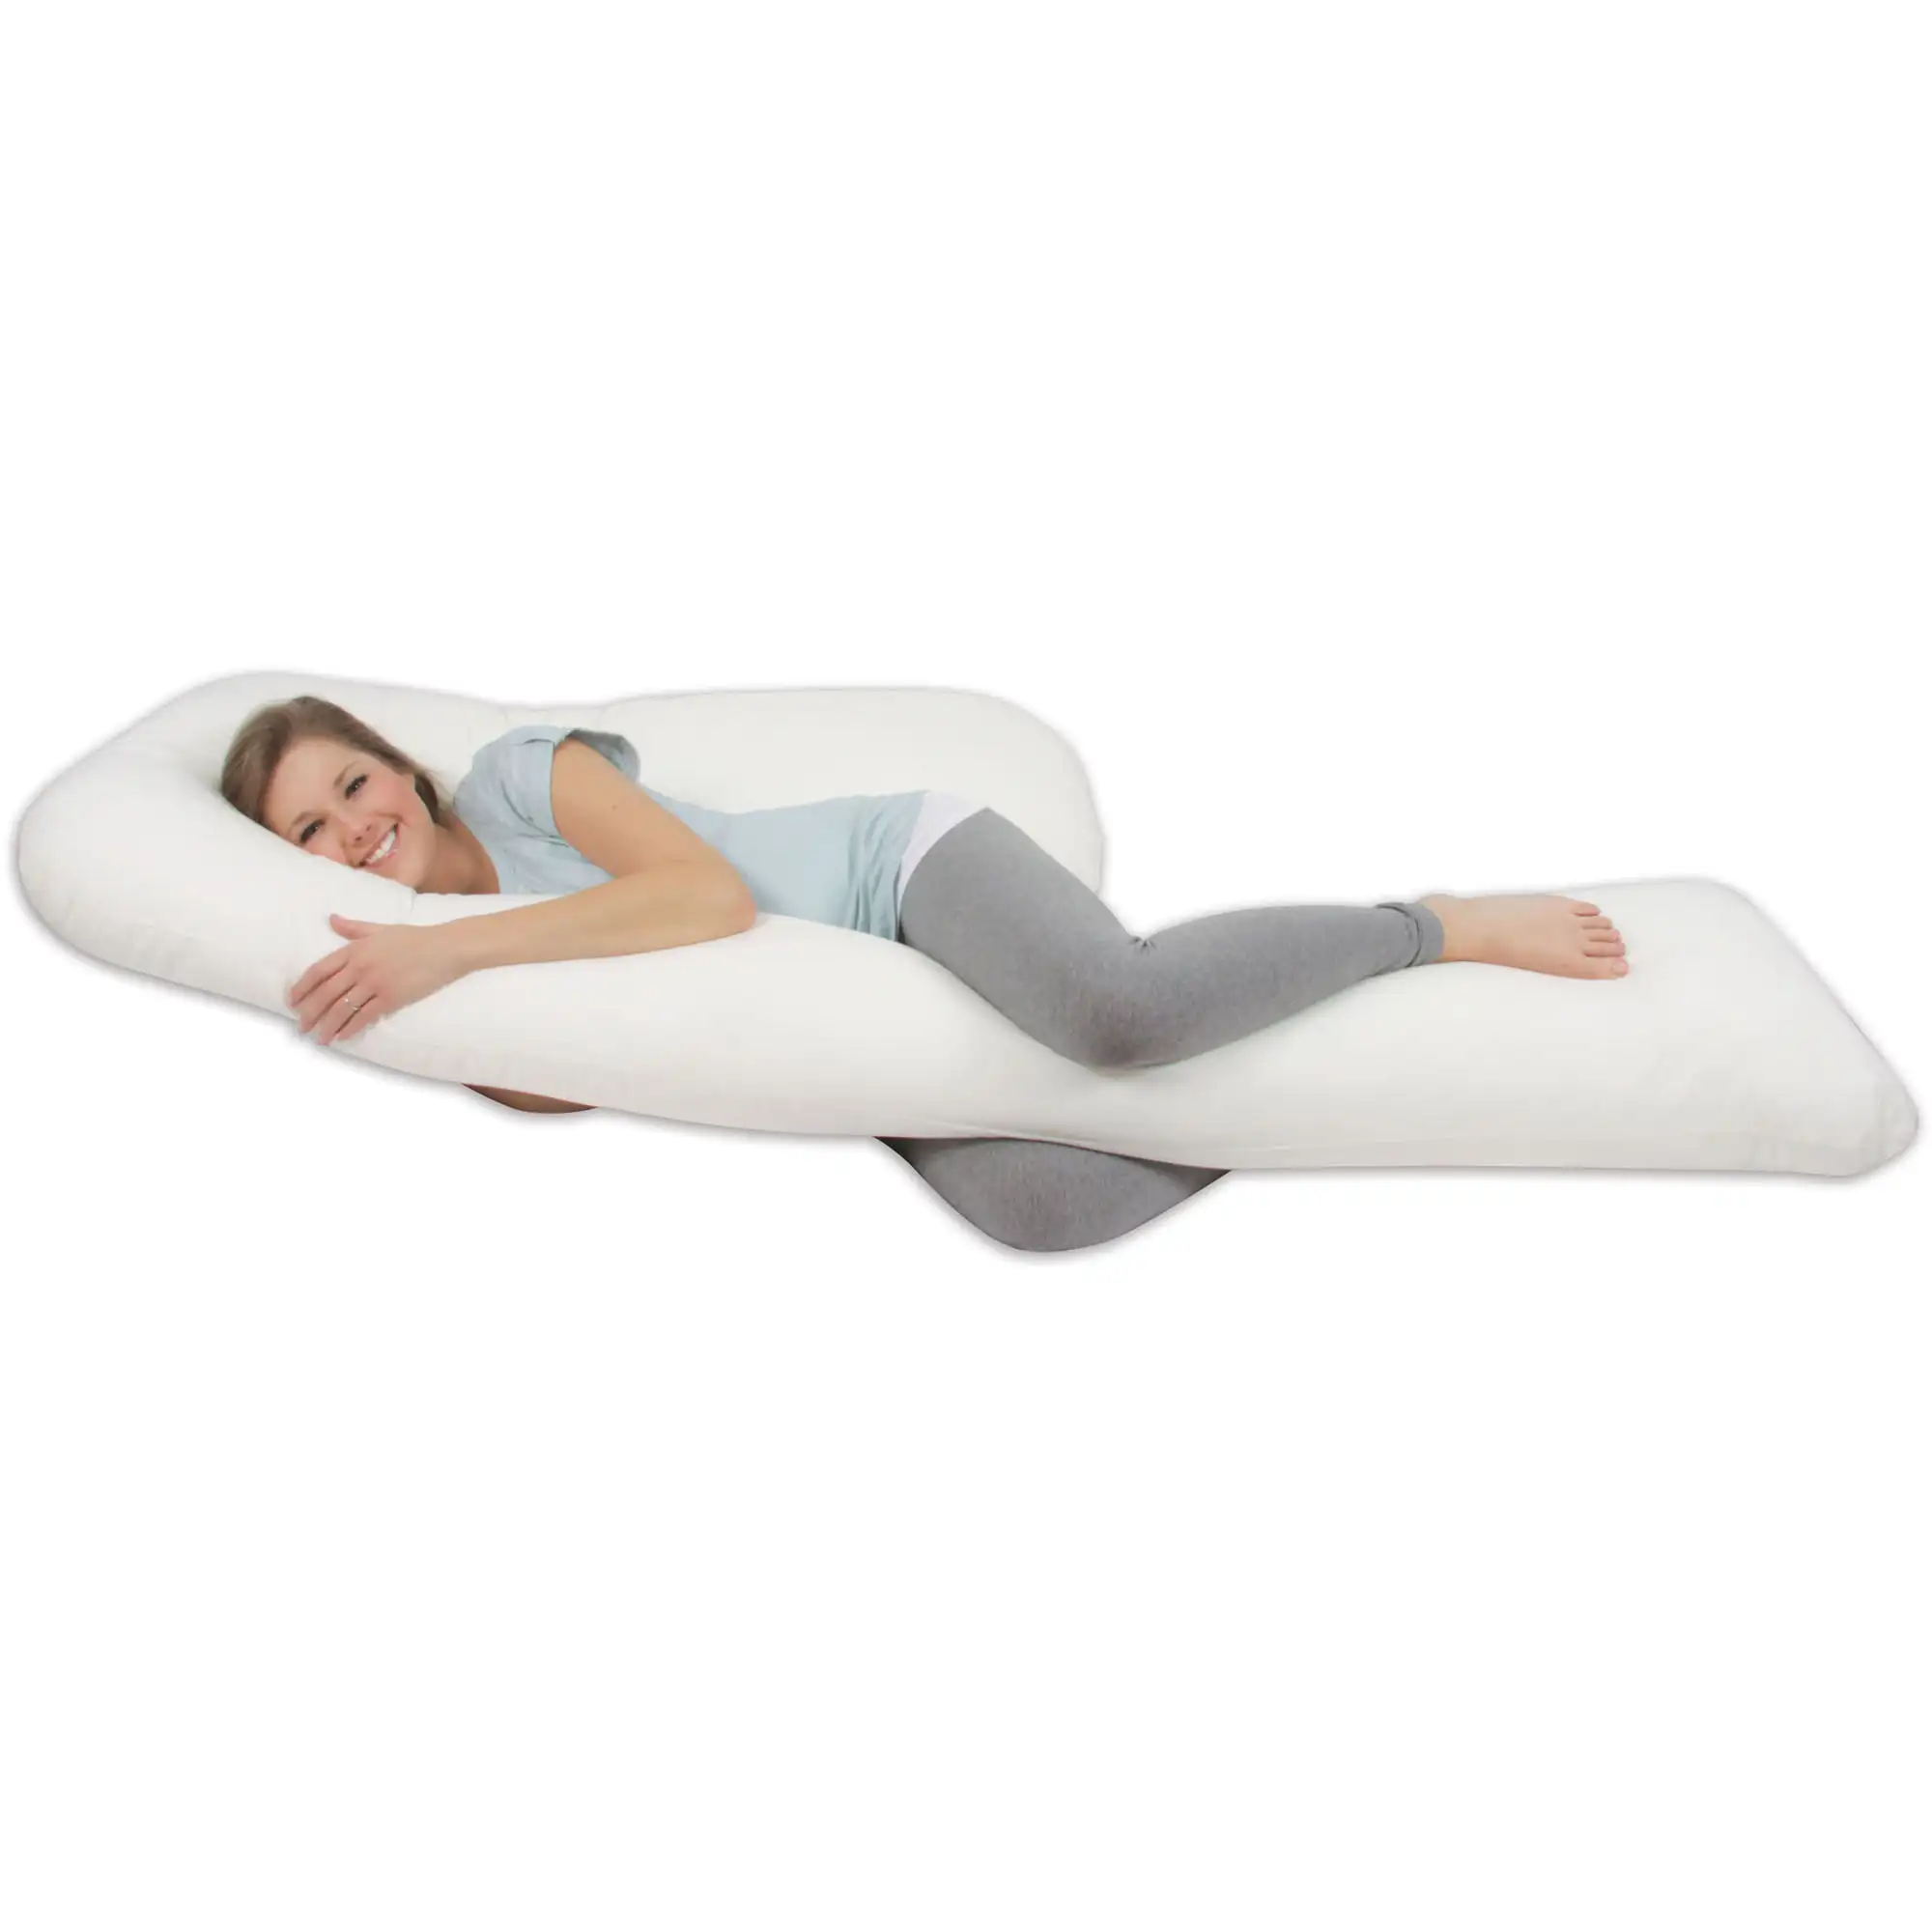 

-Leachco All Nighter Total Body Pregnancy Pillow, Ivory,Extra-wide and Long Head Section for Versatile Sleeping Styles